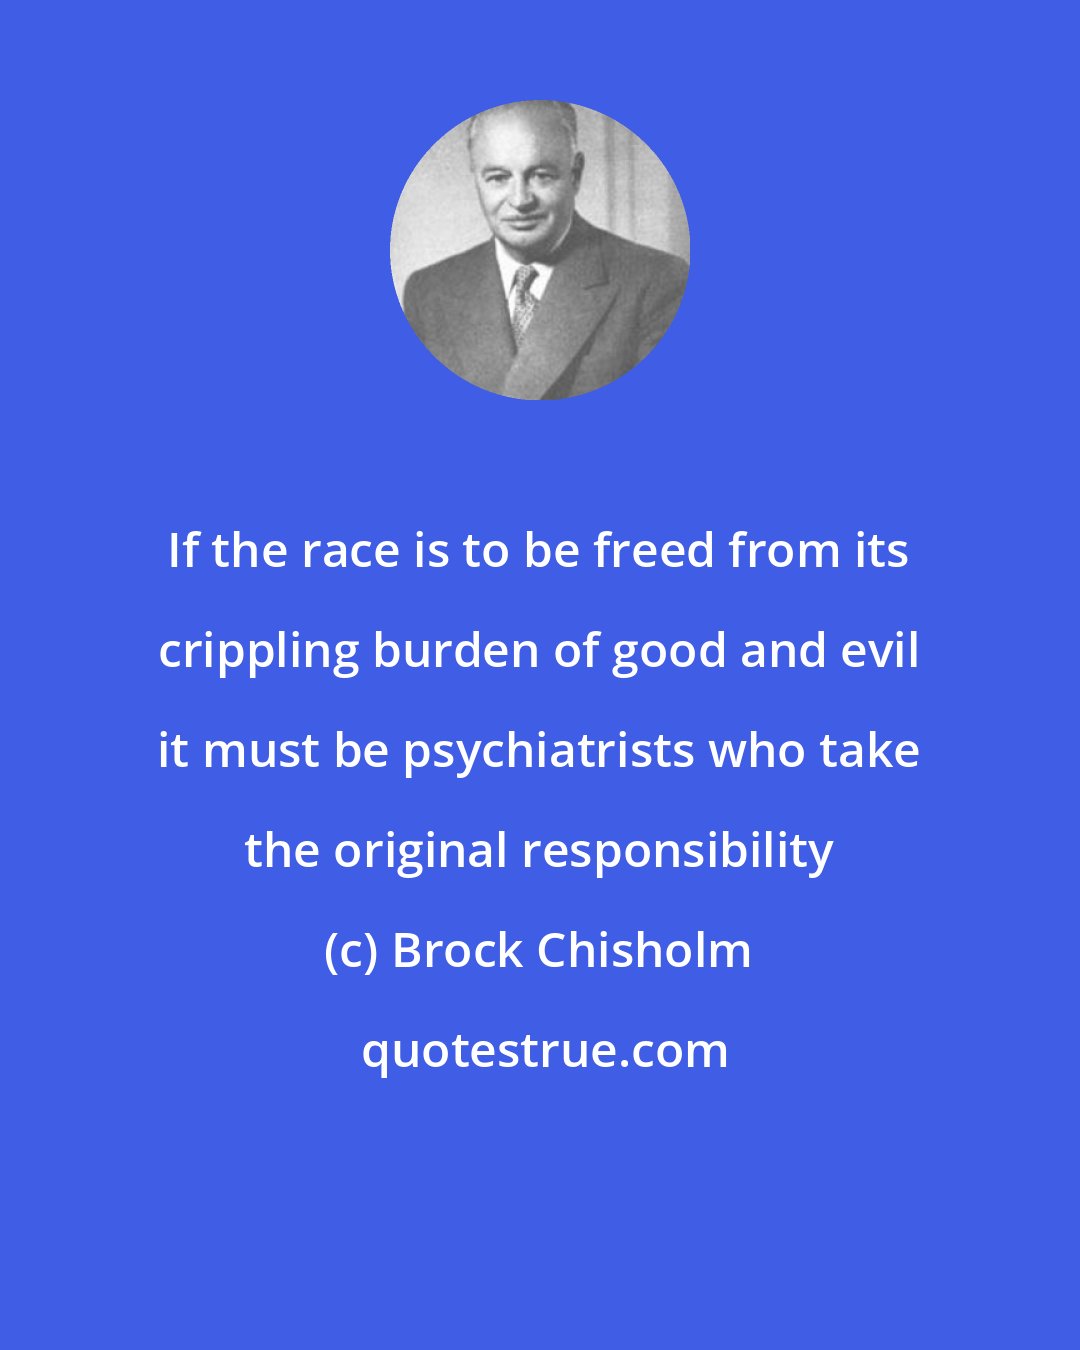 Brock Chisholm: If the race is to be freed from its crippling burden of good and evil it must be psychiatrists who take the original responsibility